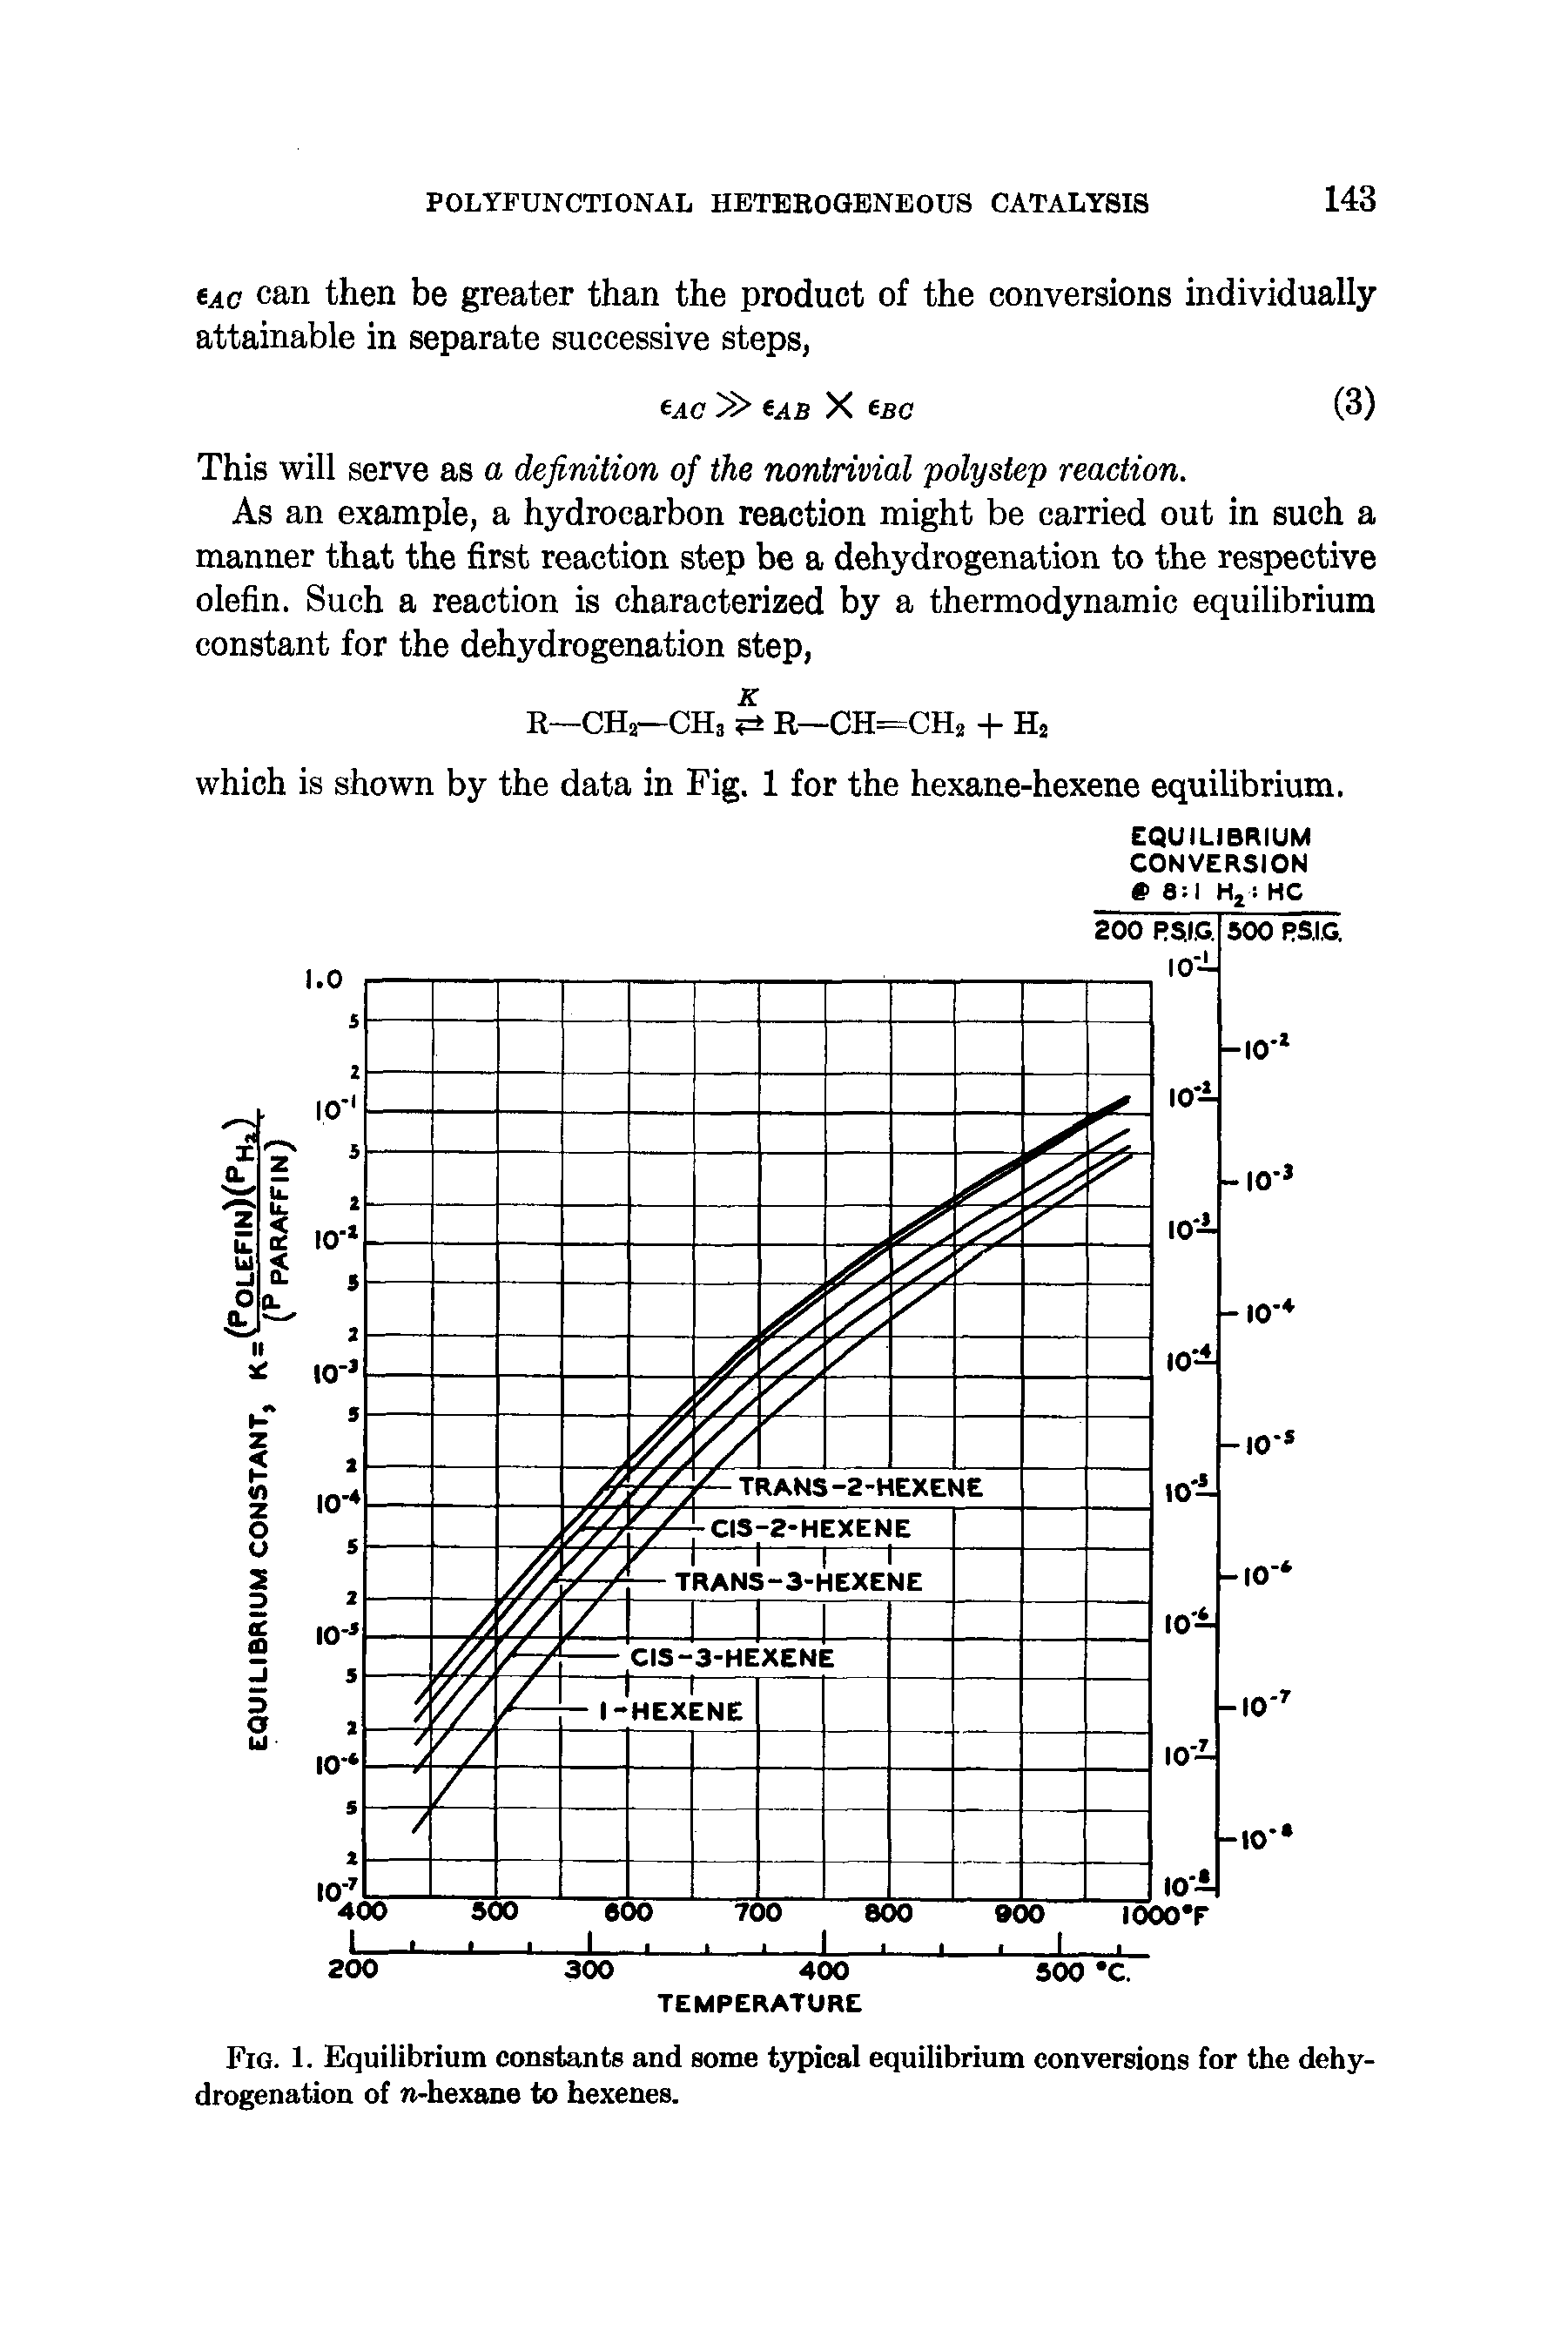 Fig. 1. Equilibrium constants and some t3 )ical equilibrium conversions for the dehydrogenation of n-hexane to hexenes.